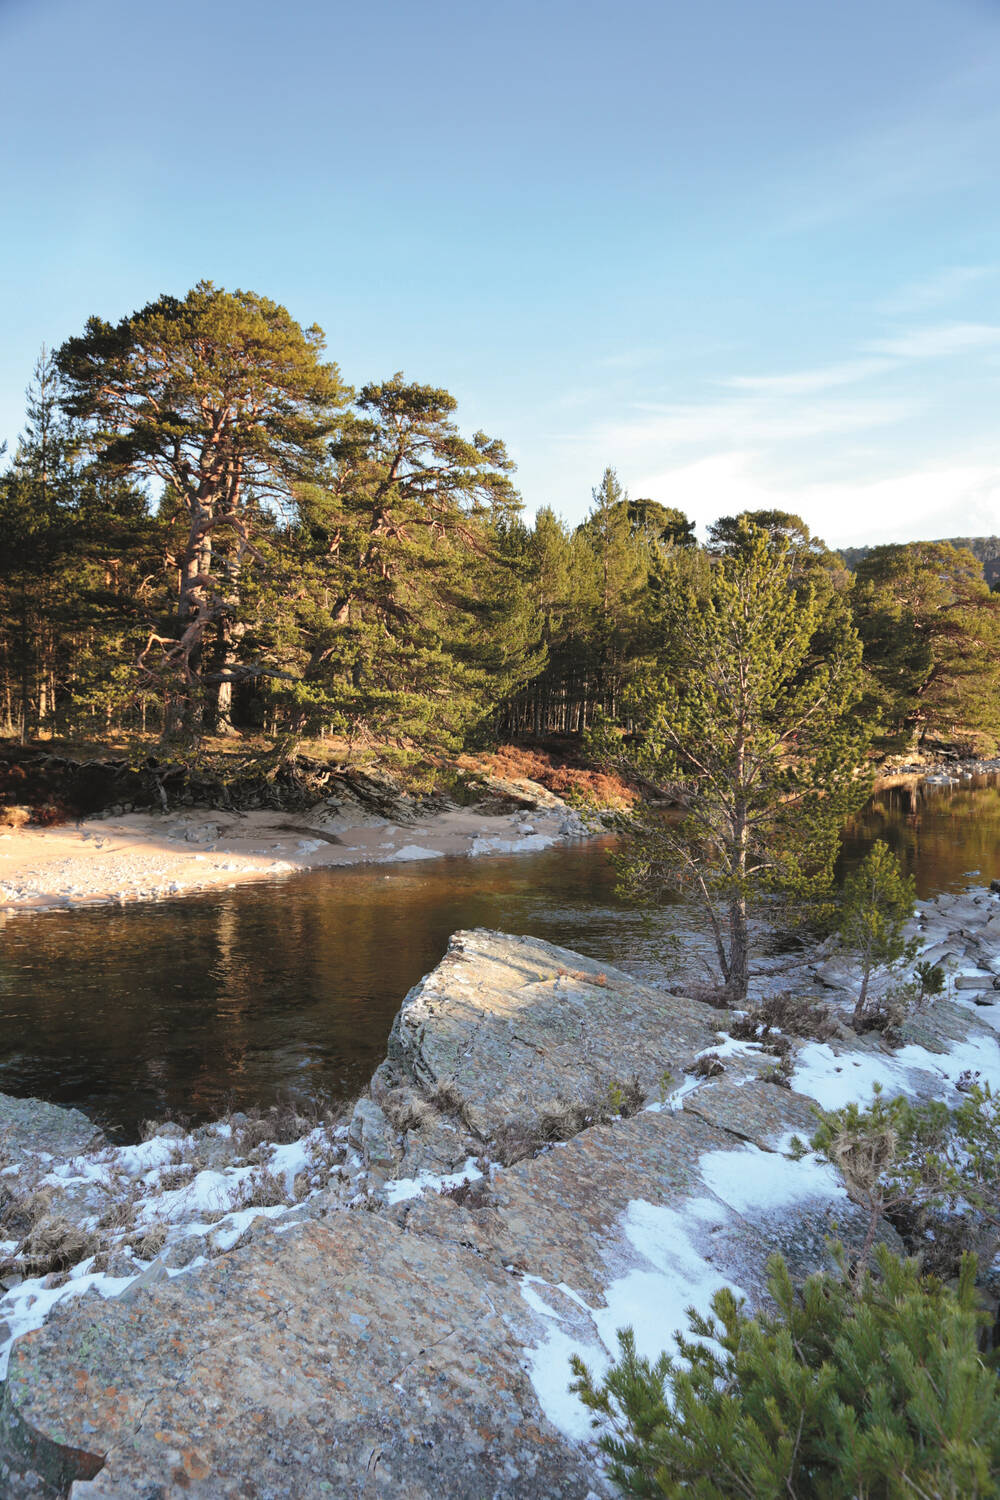 Pine trees grow either side of a wide river, that flows over a rocky drop.